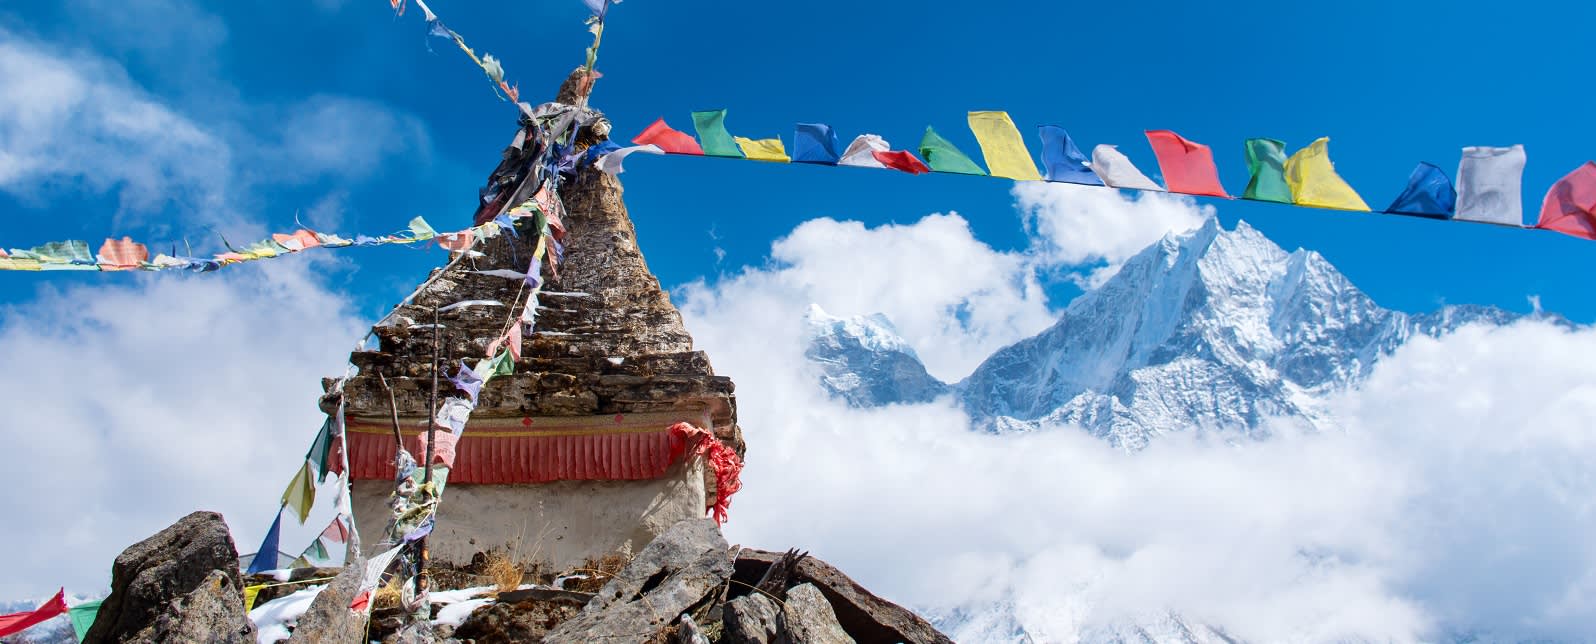 Songs of the Mountains - On Your Nepal Tour